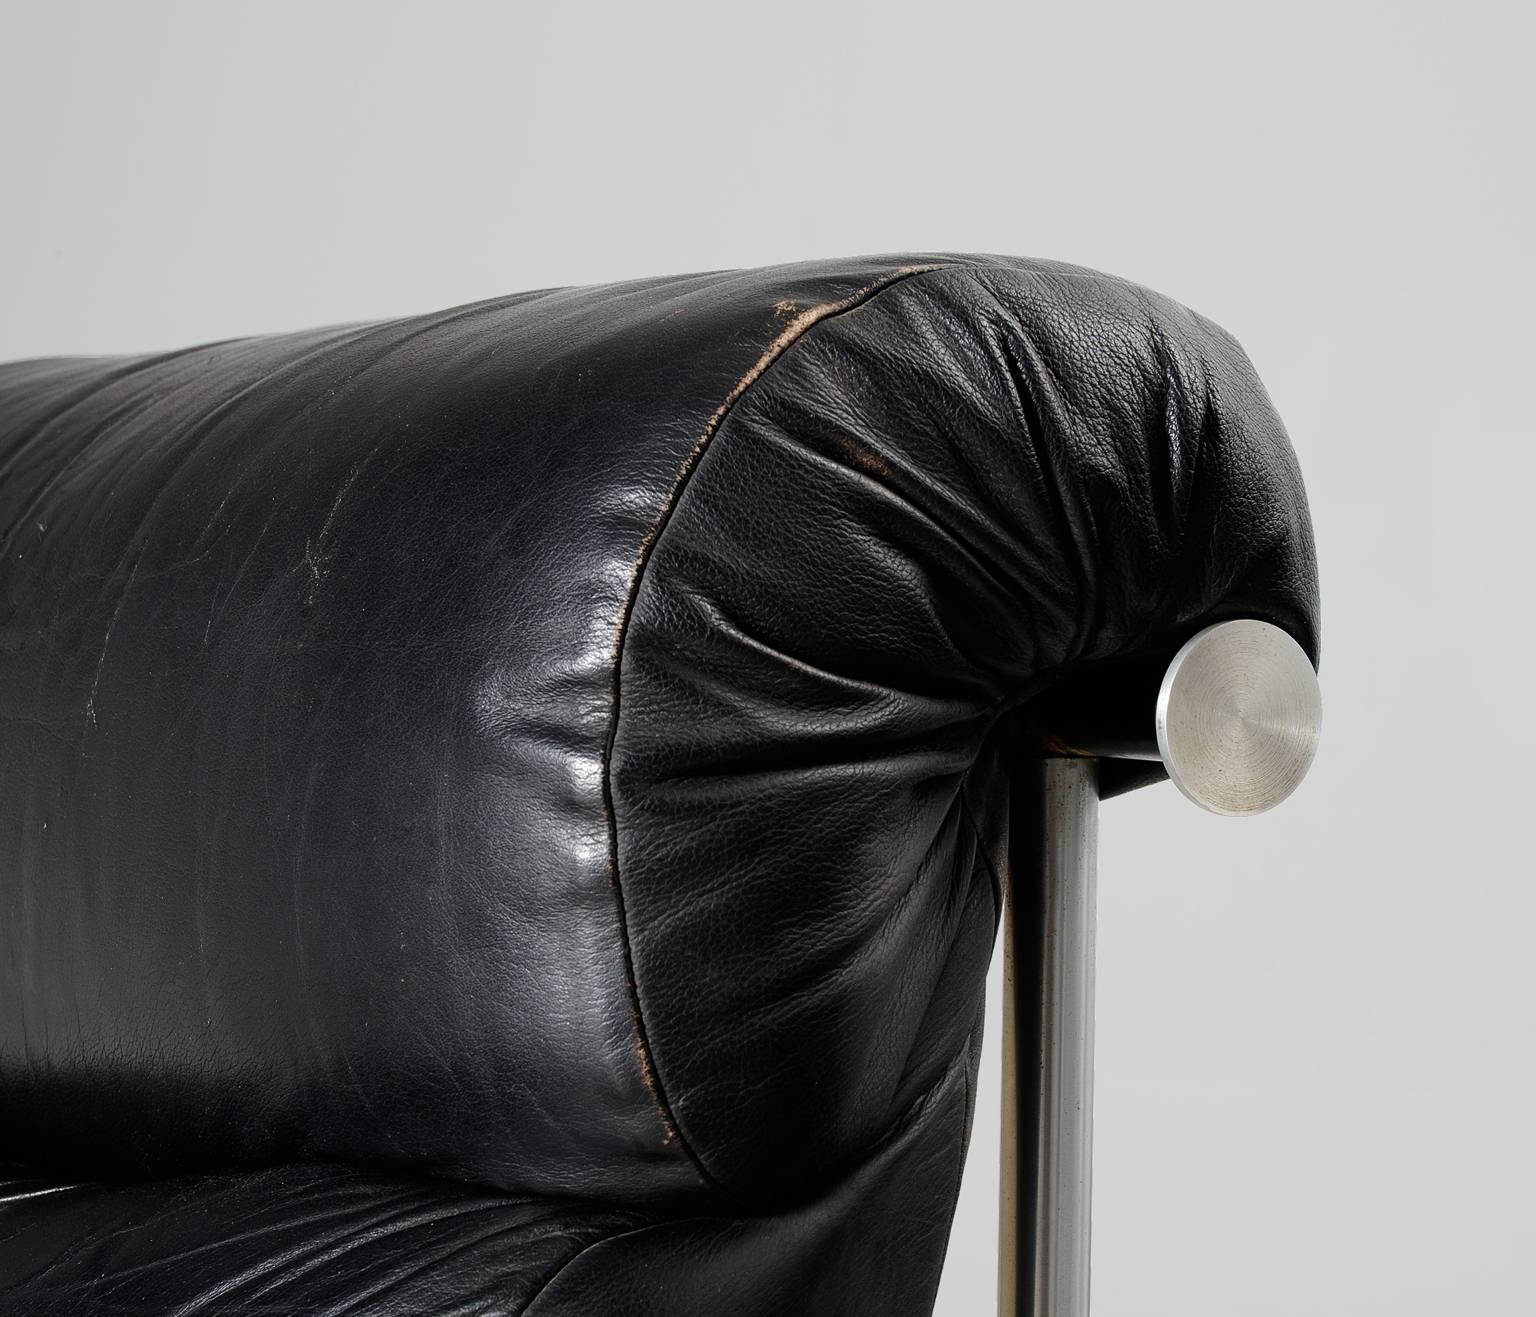 Late 20th Century Georges Van Rijck Lounge Chair in Black Leather and Chrome, Belgium, 1972